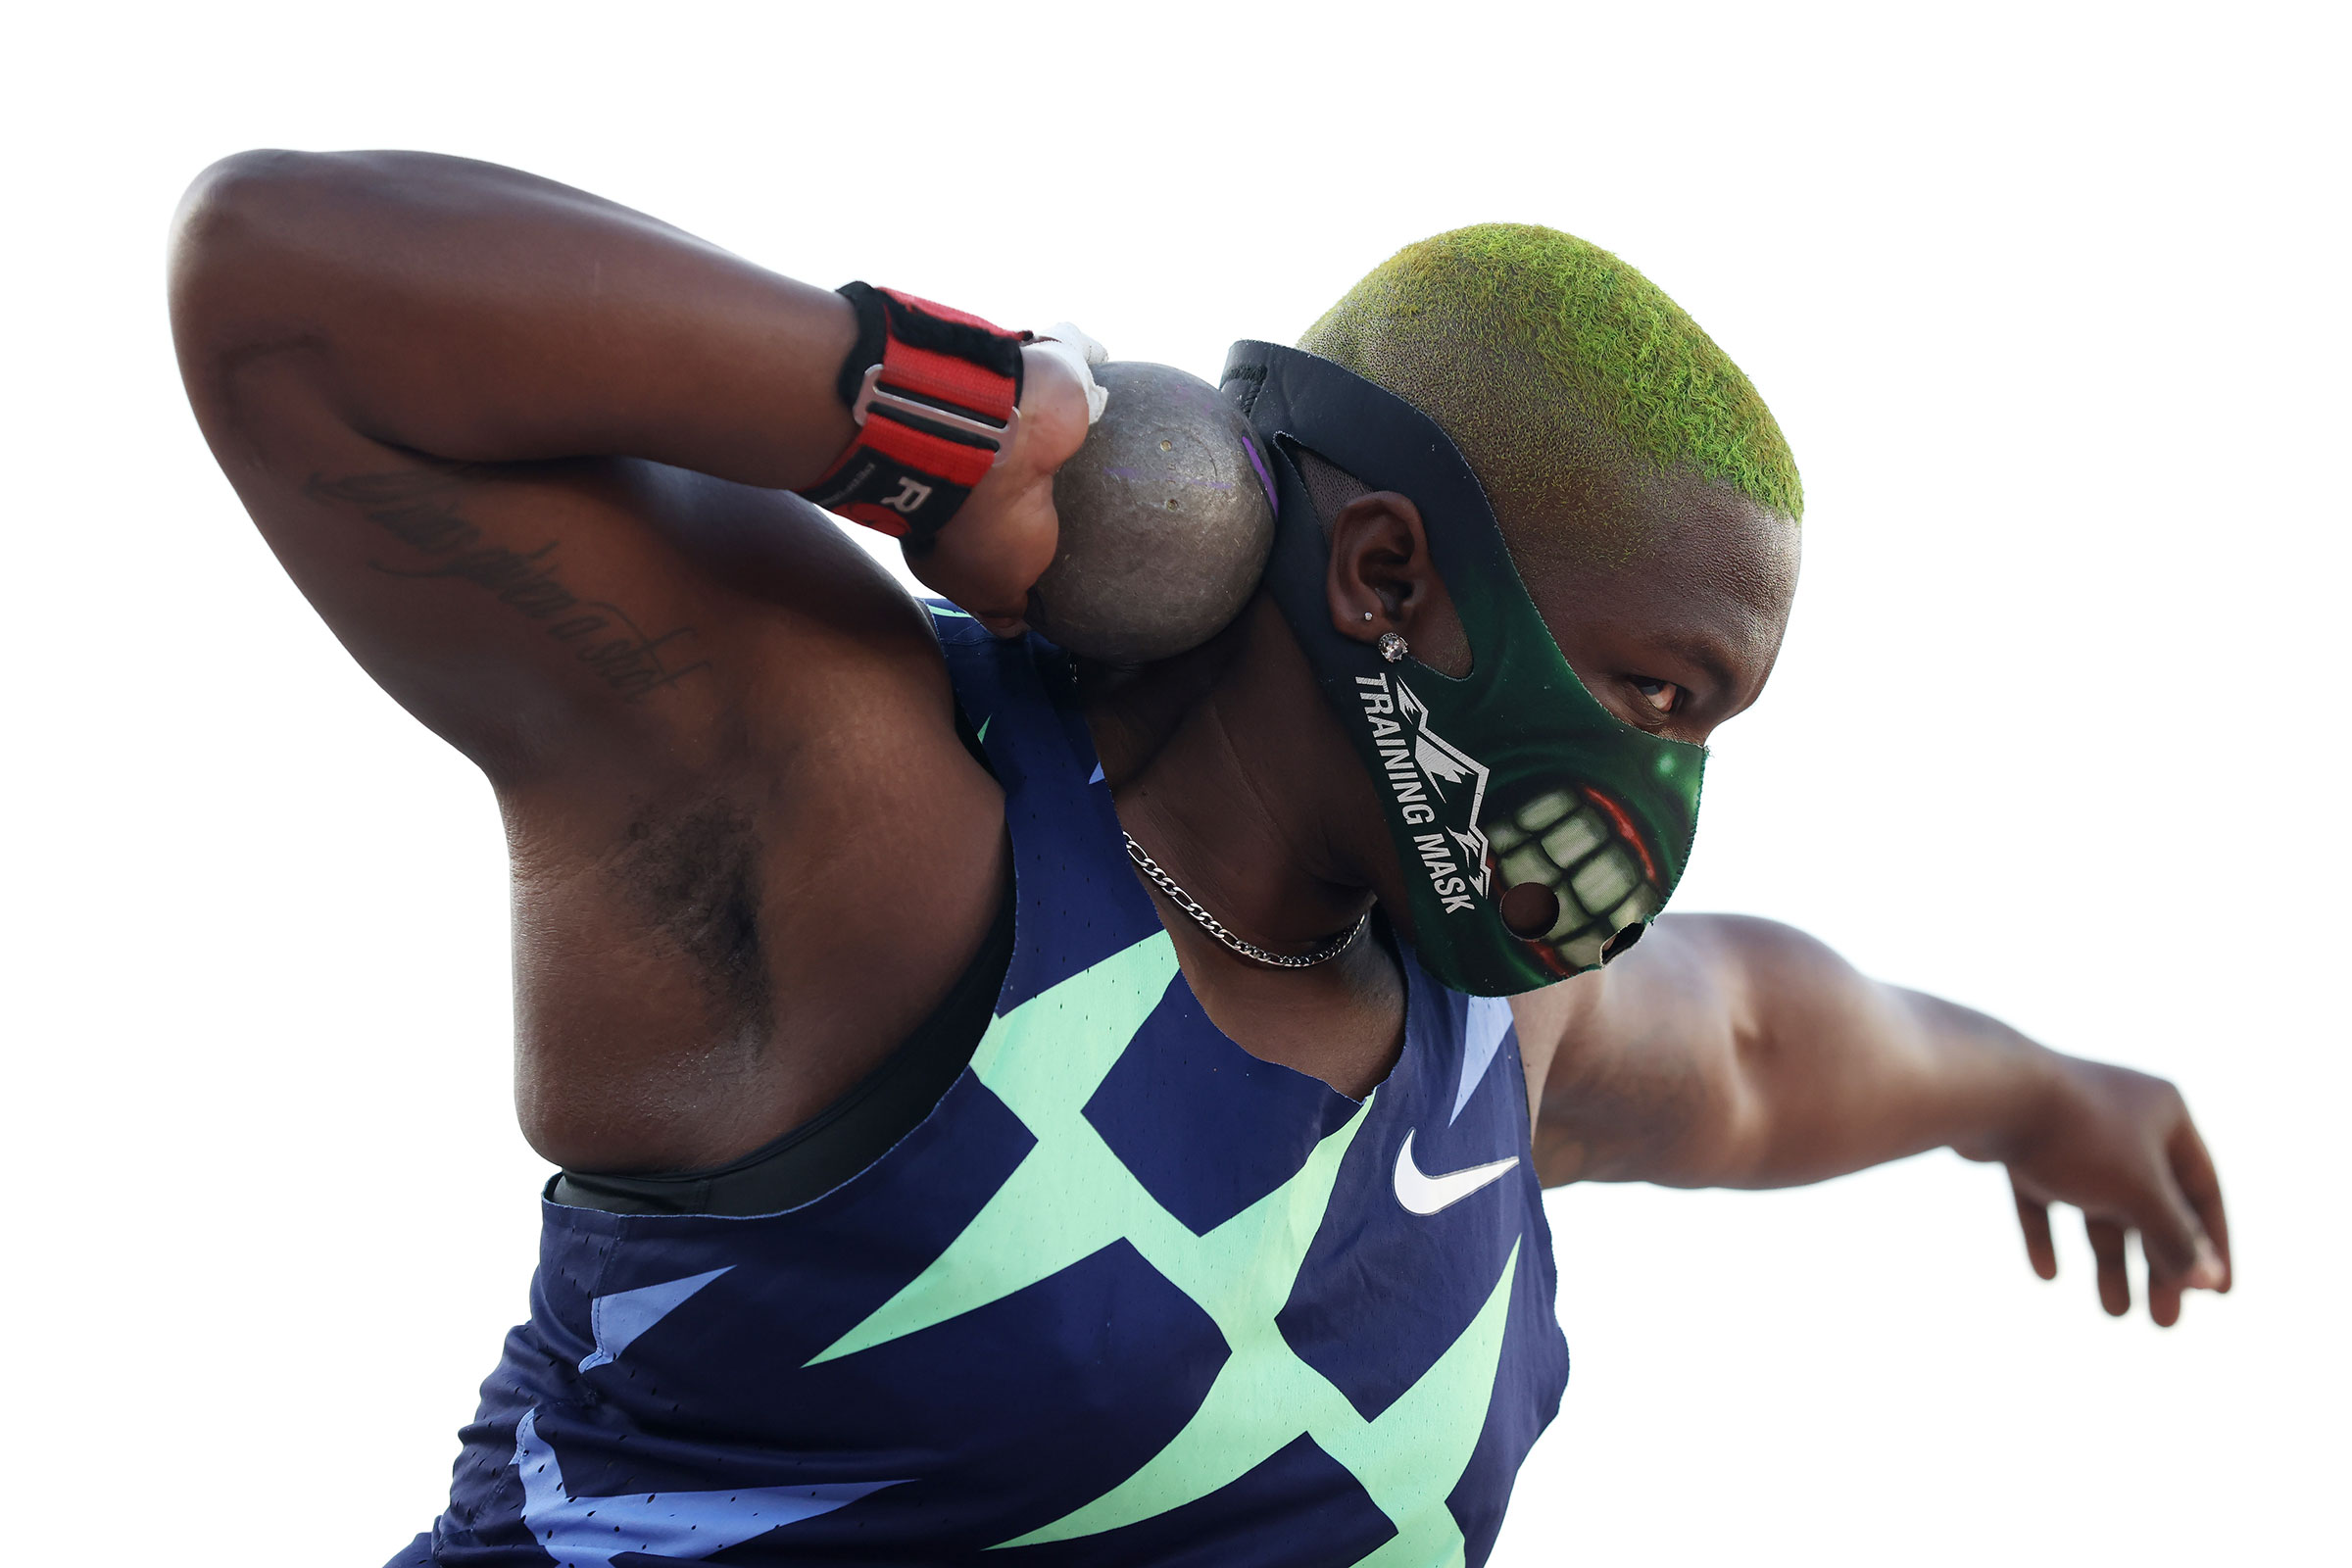 Raven Saunders competes in the Women's Shot Put Finals on day seven of the 2020 U.S. Olympic Track and Field Team Trials in Eugene, Oreg. on June 24, 2021. (Andy Lyons—Getty Images)